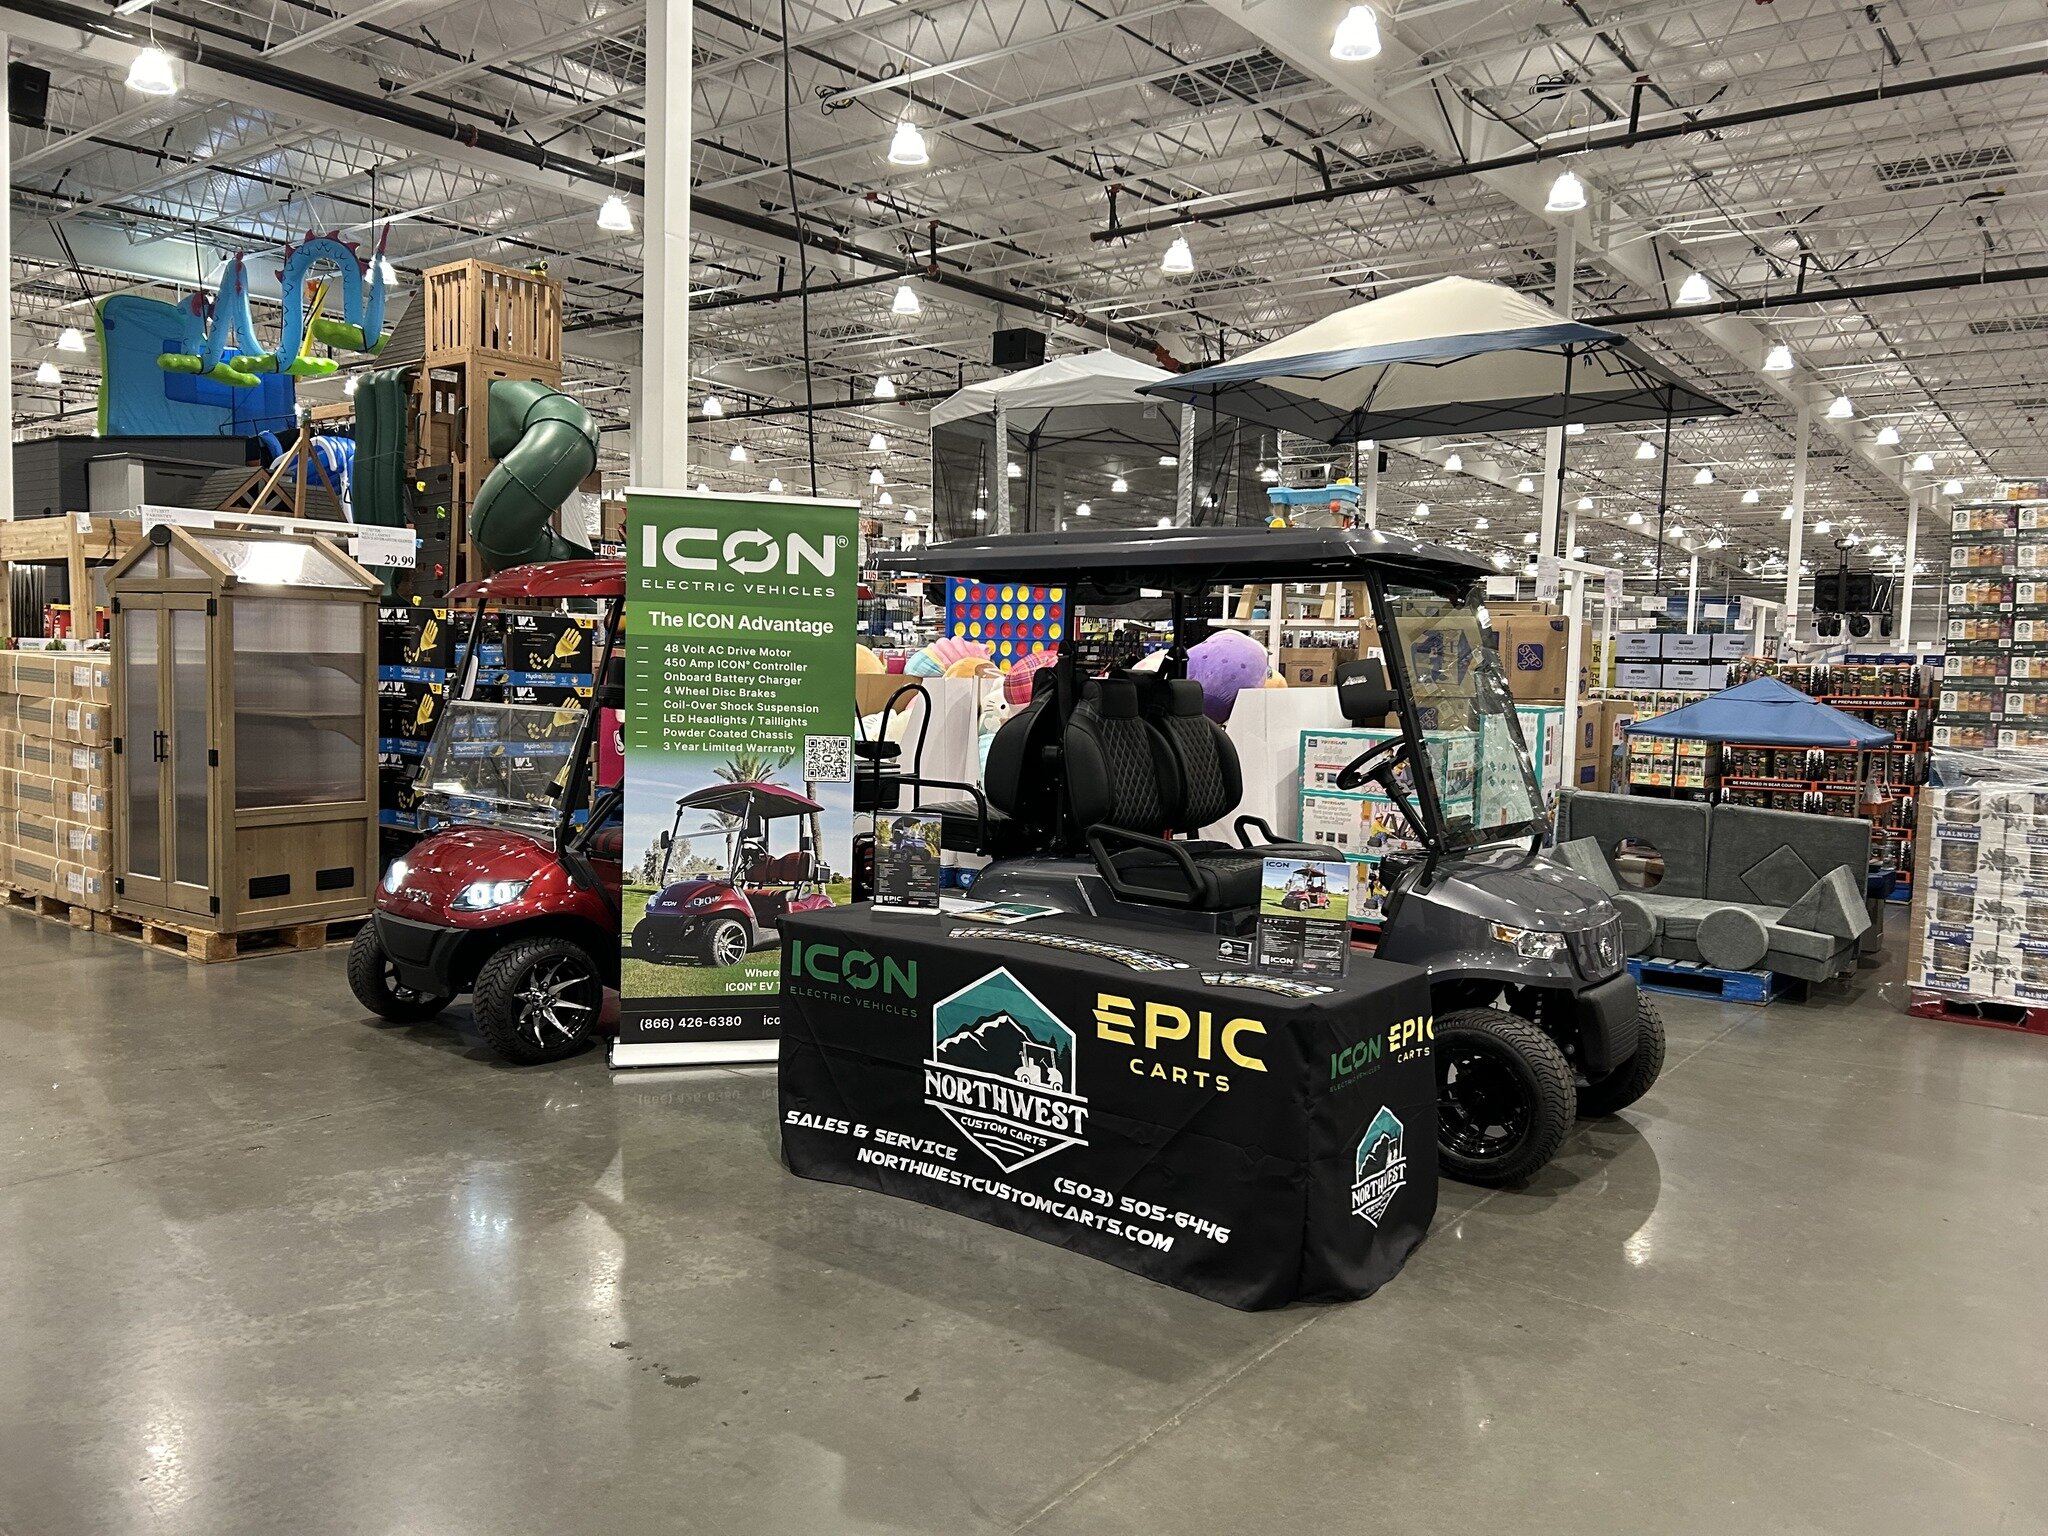 Golf carts at #costco - Camas Edition! Come by the East Vancouver warehouse and check out the Icon and Epic product line. Two, four, and six seat configurations available! #iconev 

#Icon #golfcart #golfcar #personal #electric #vehicle #EV #NEV #Port